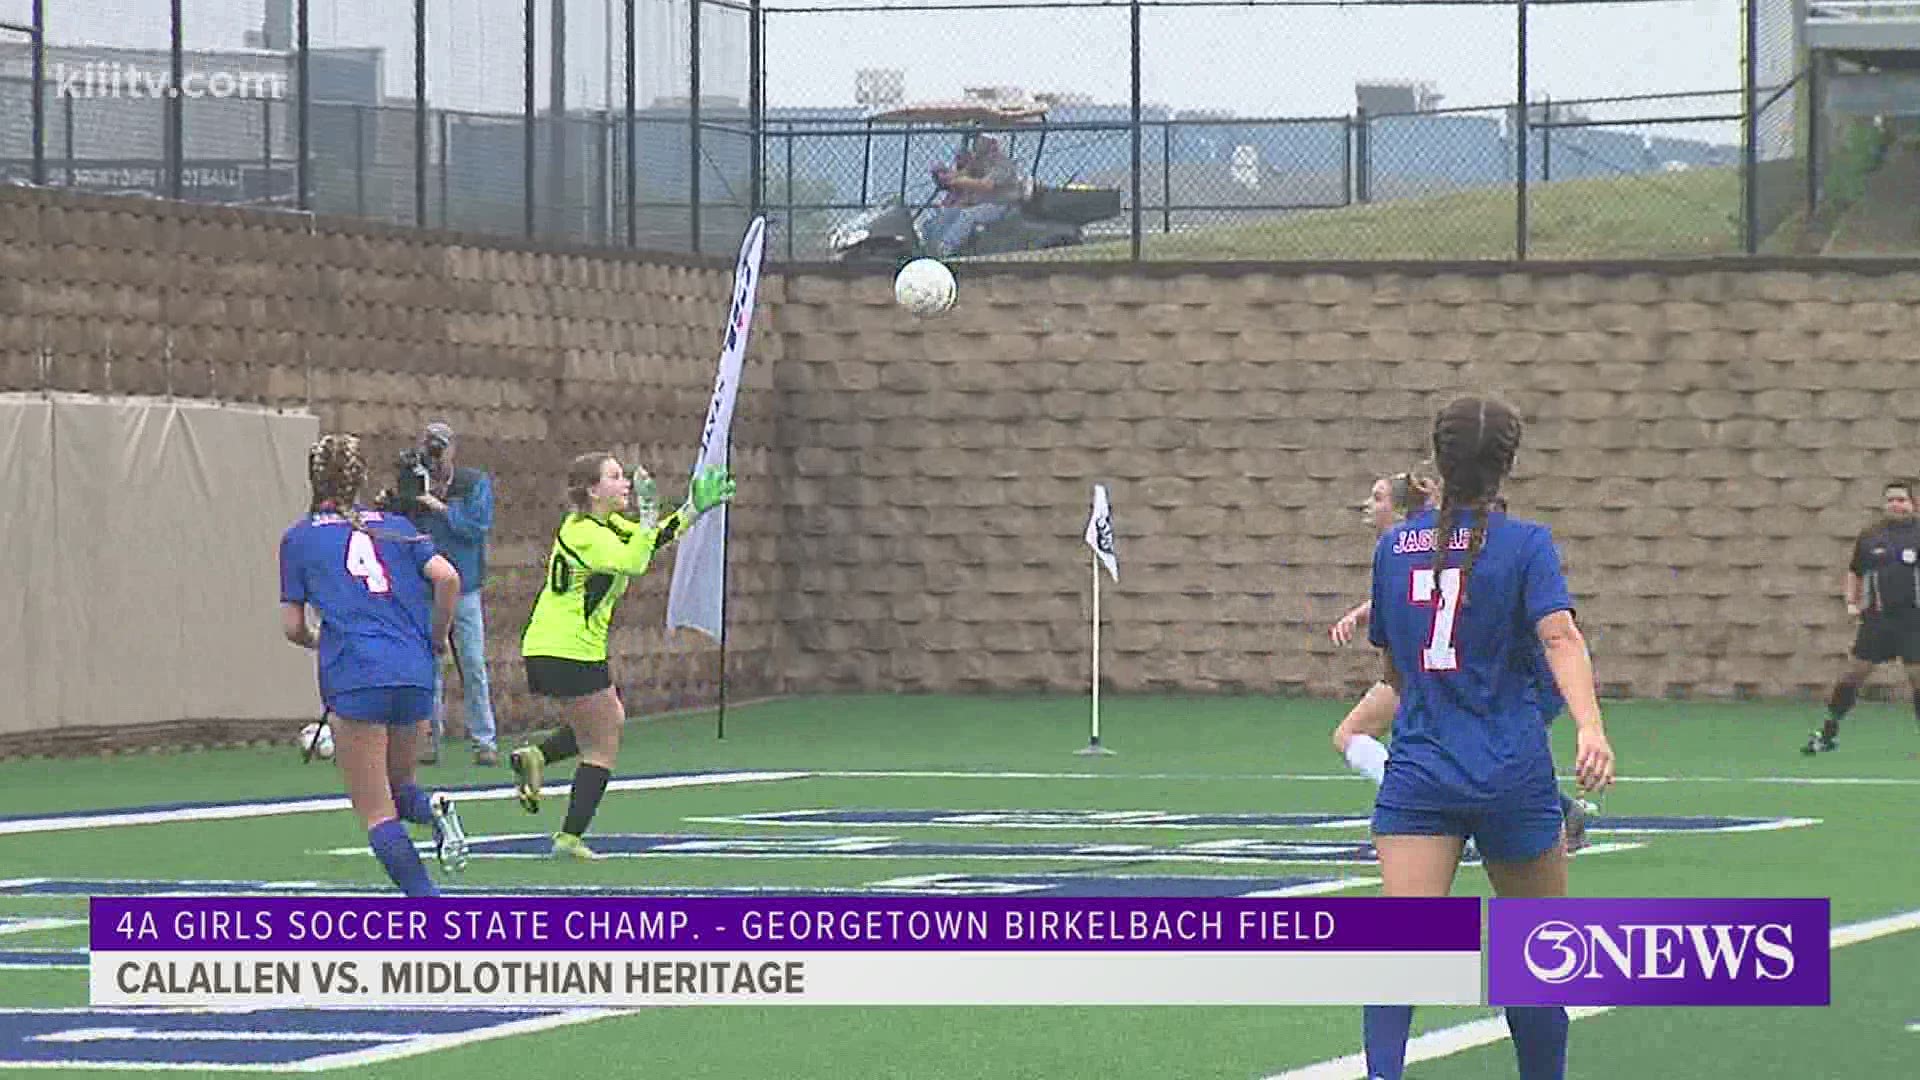 The Midlothian Heritage Jaguars scored four goals in the first 17 minutes to put it away early.